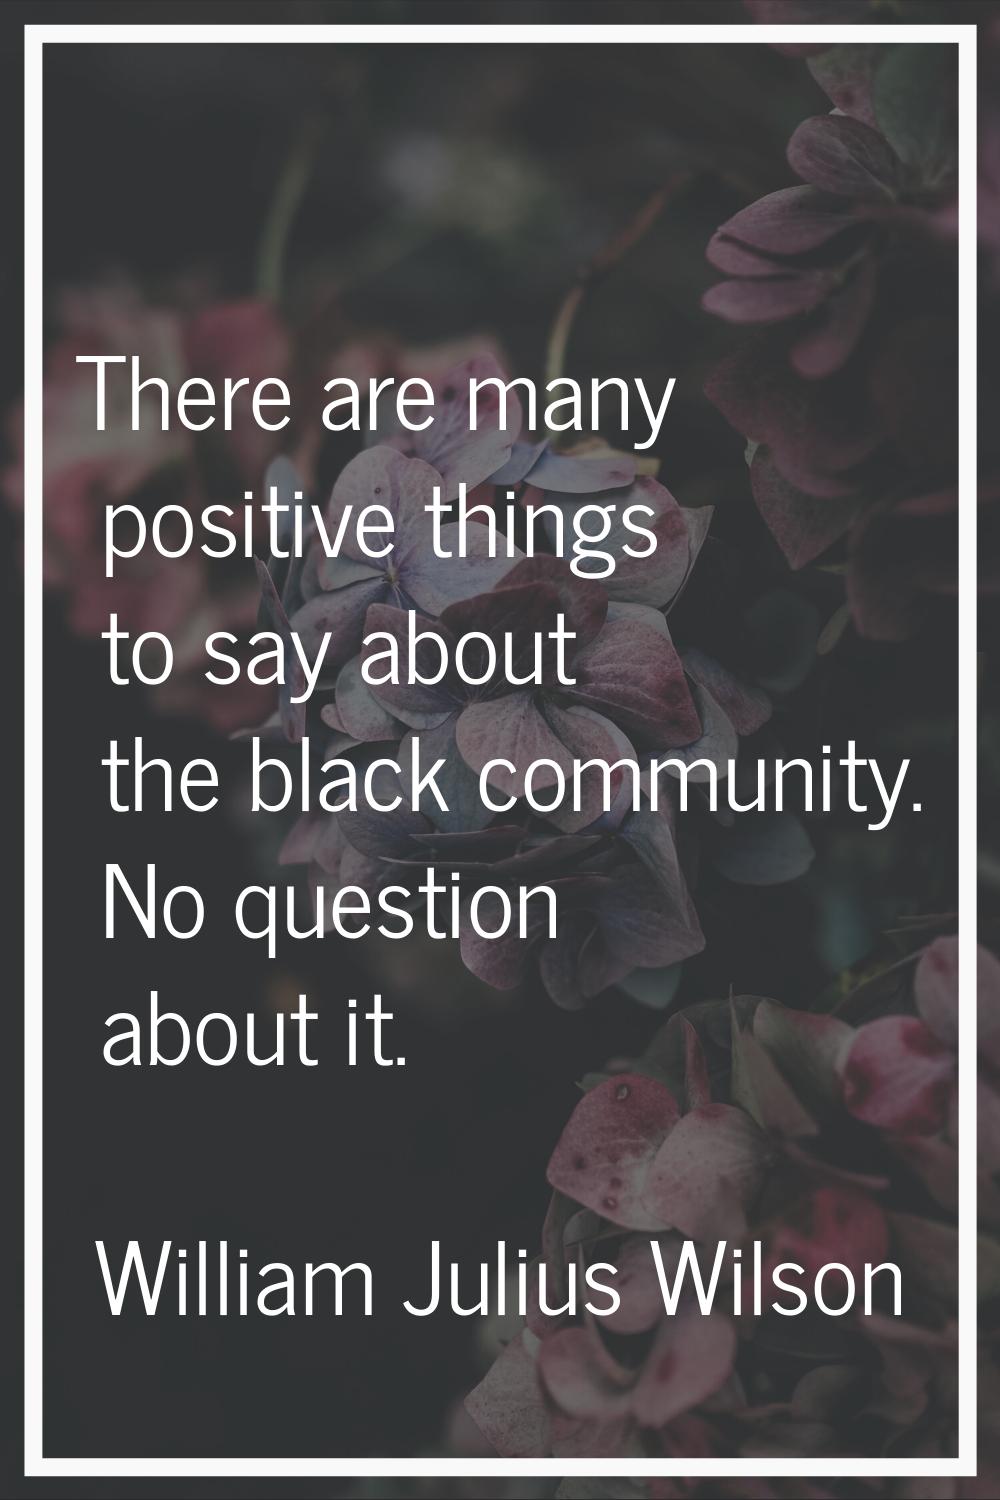 There are many positive things to say about the black community. No question about it.